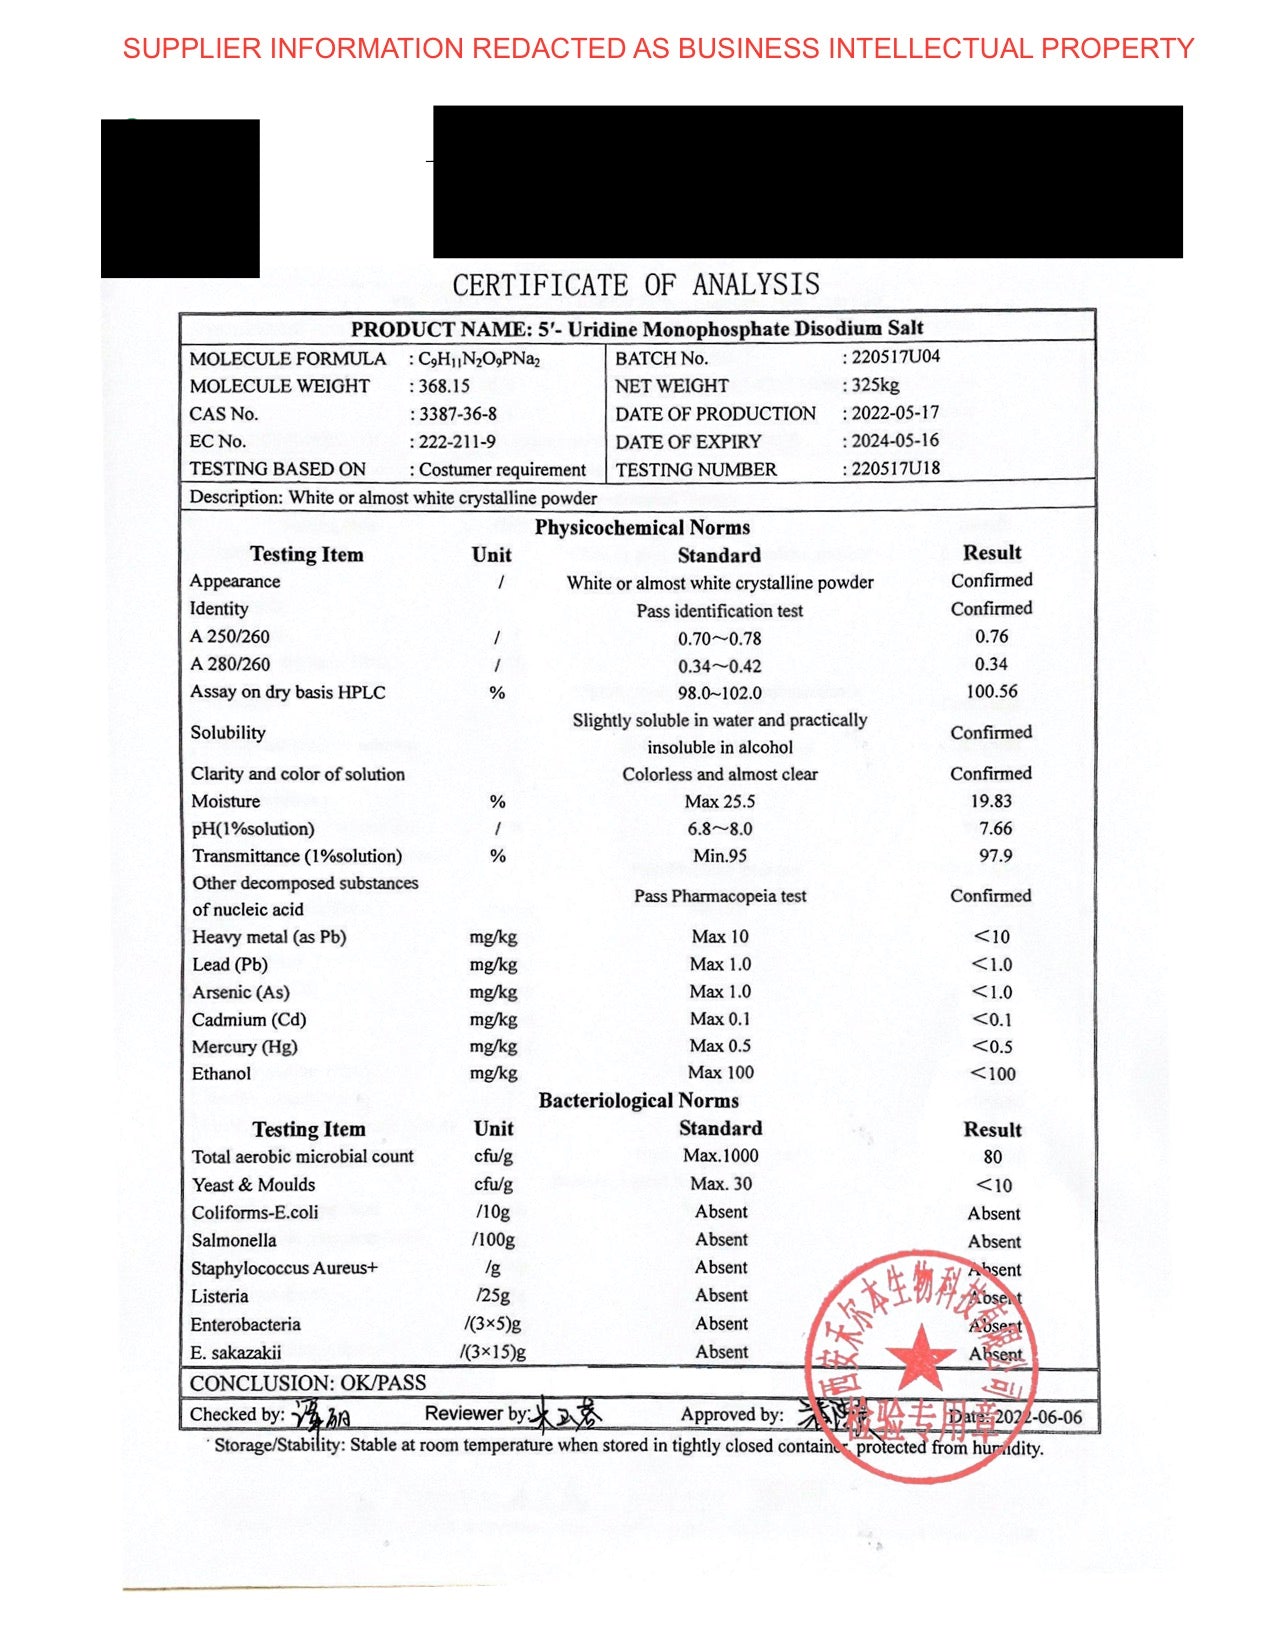 250mg Uridine Monophosphate Nootropic for Focus and Motivation  -  Certificate of Analysis - Nice Supplement Co.